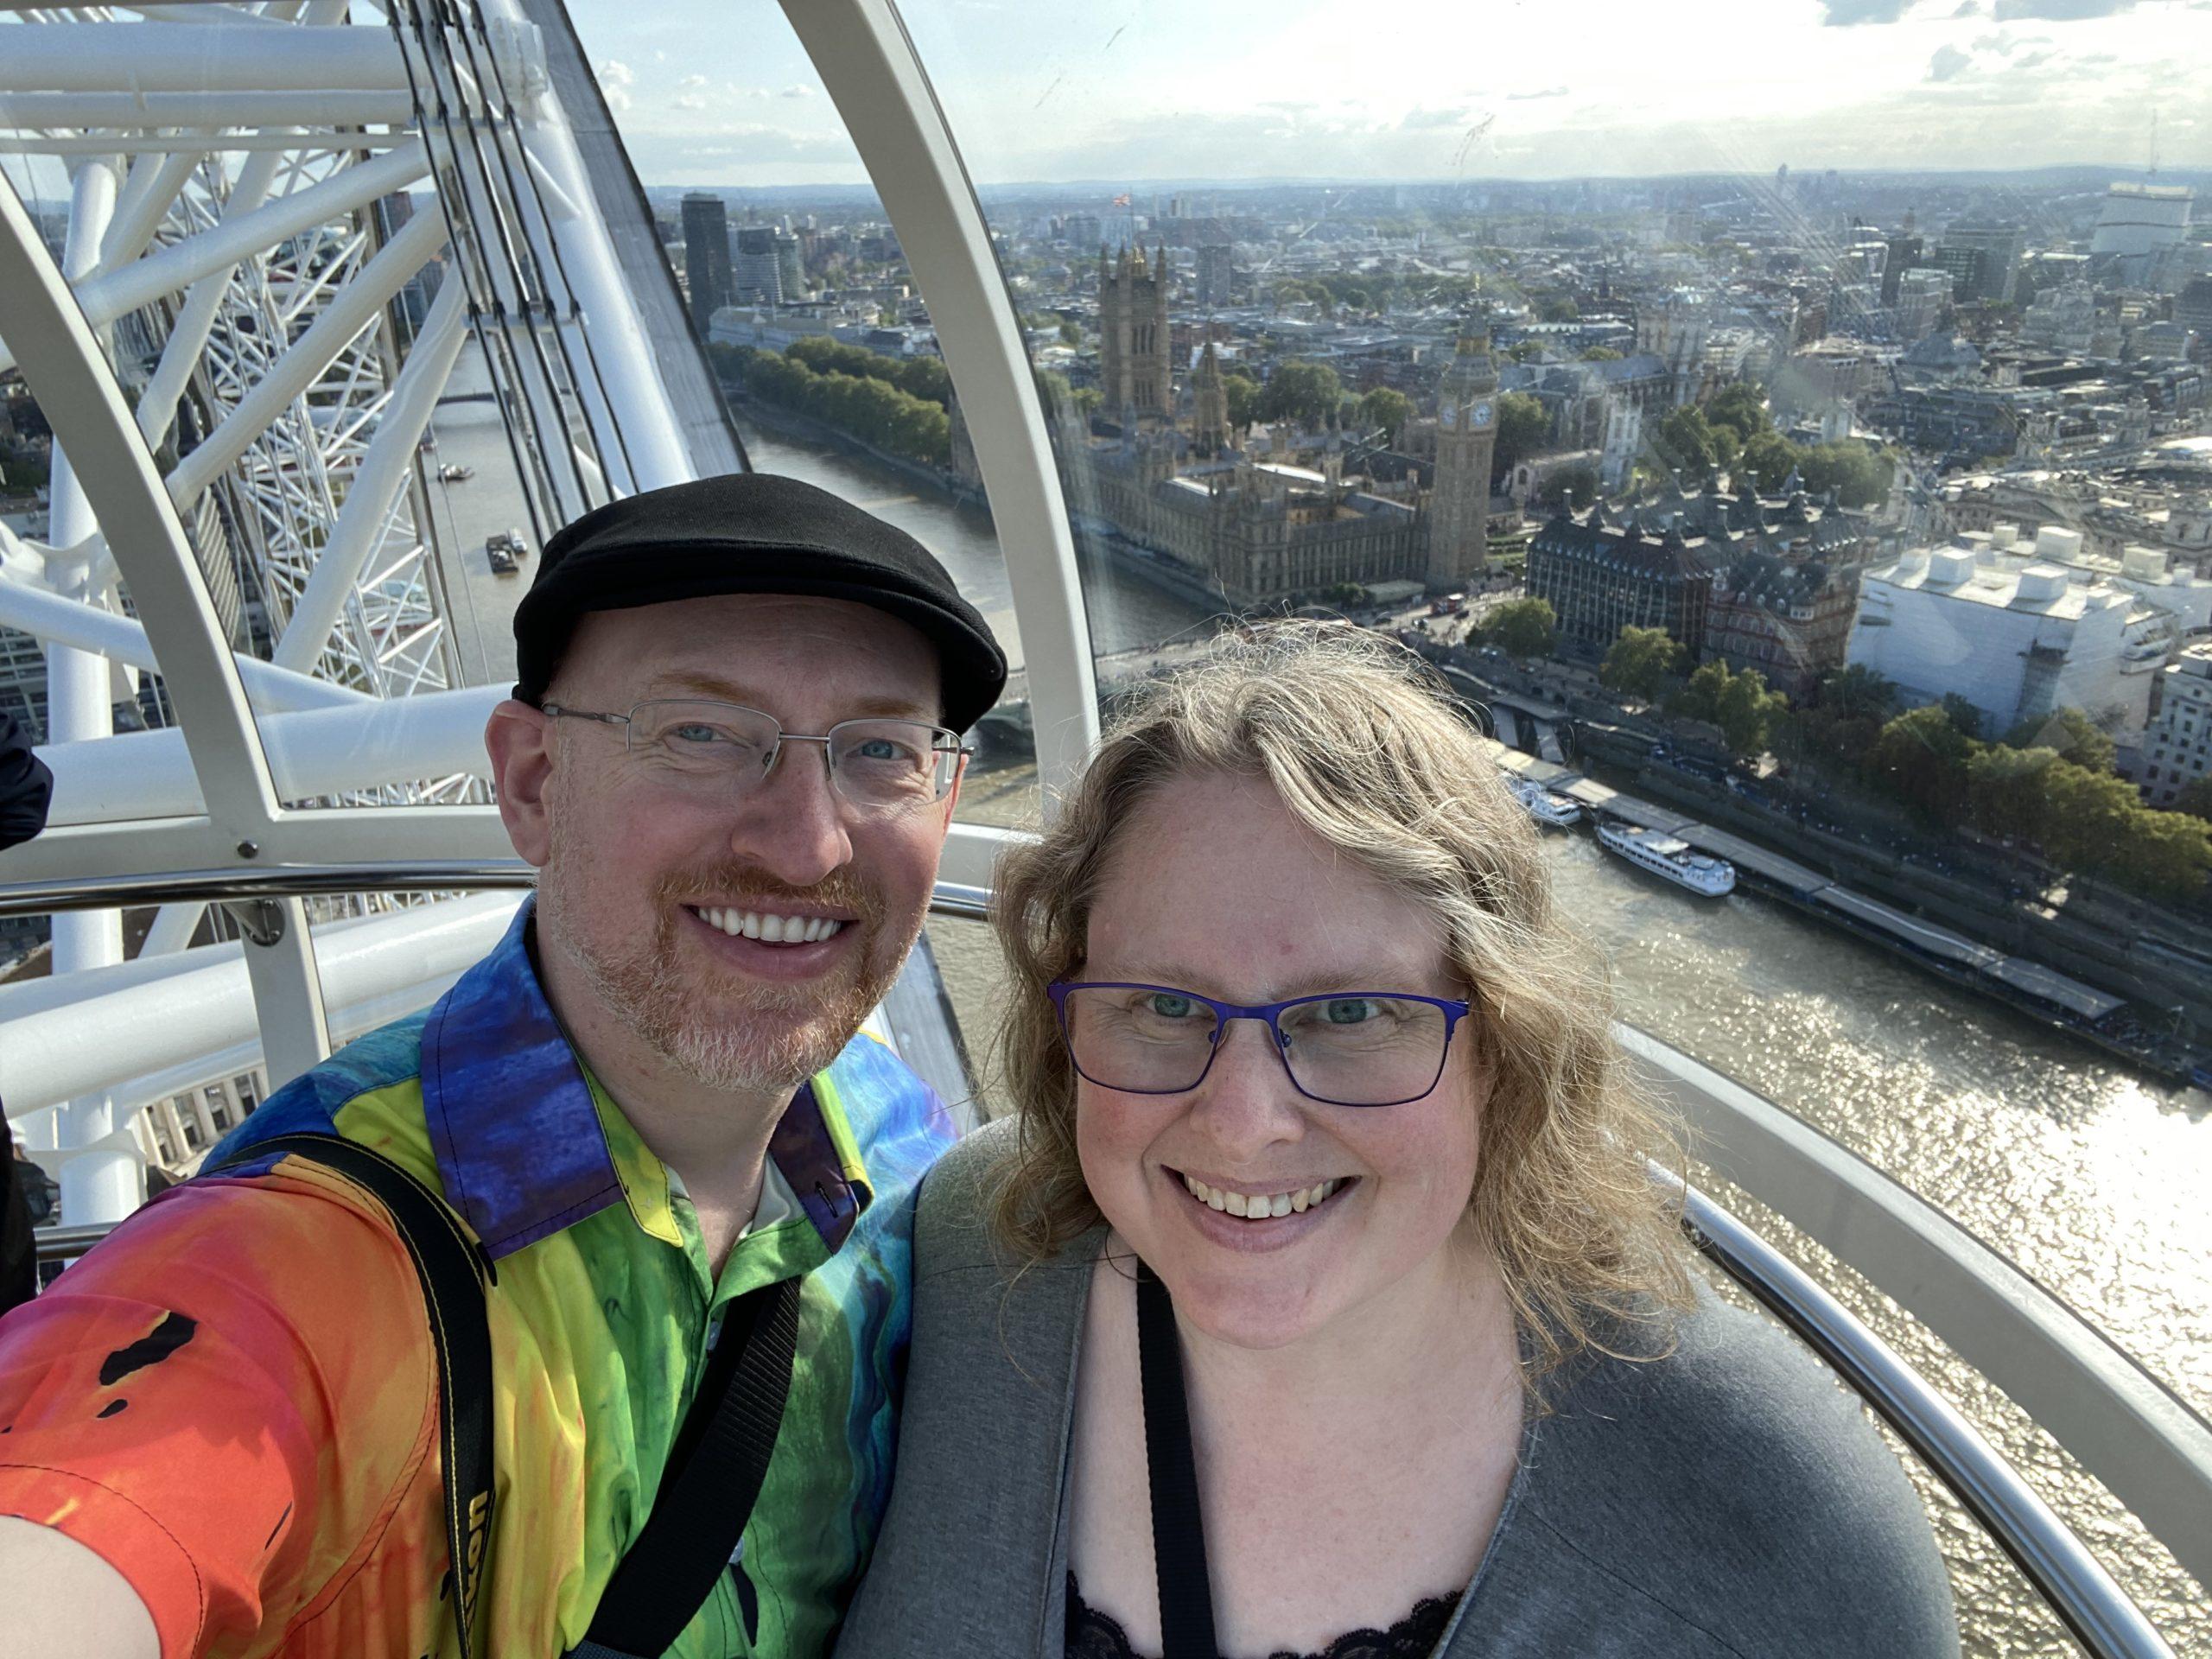 My wife and I in one of the carriages of the London Eye ferris wheel; the Palace of Westminster, Big Ben, Westminster Abbey, and the Thames are visible behind and below us.